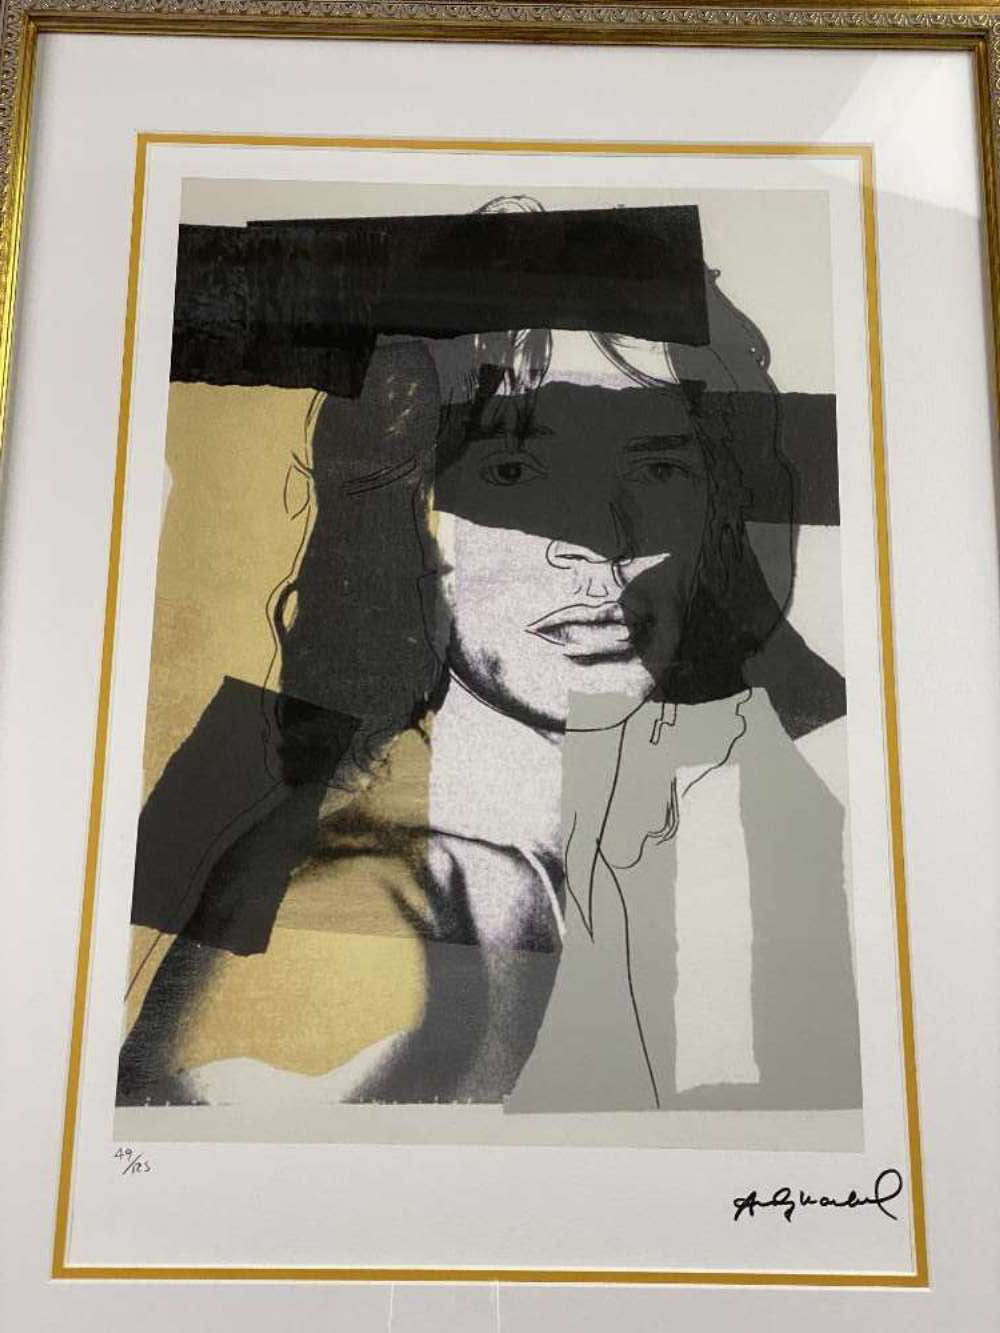 Andy Warhol (1928-1987) “Jagger” Numbered Ltd Edition of 125 Lithograph #49, Ornate Framed. - Image 2 of 8